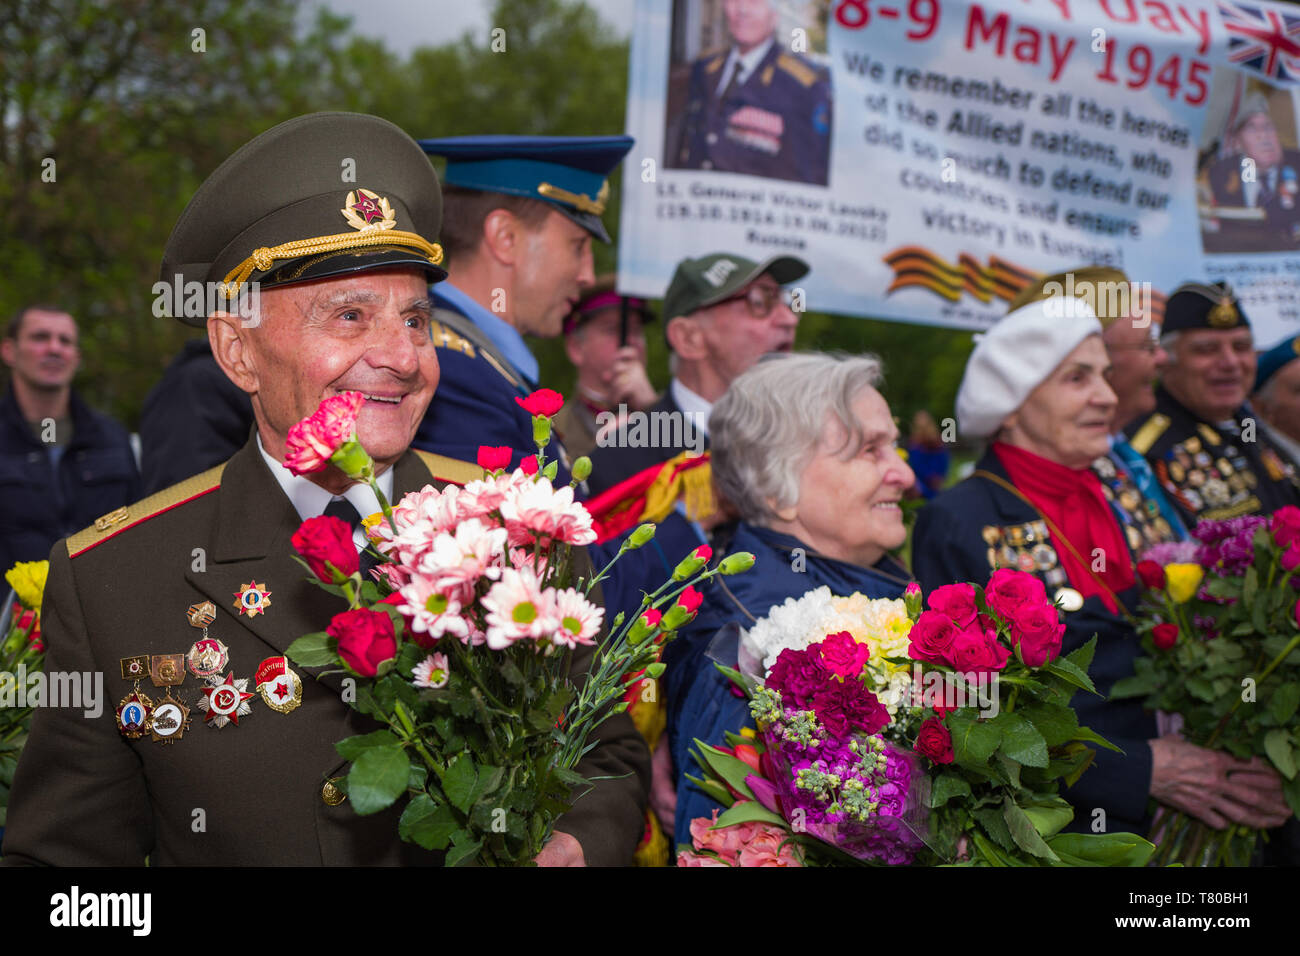 London, UK. 9th May, 2019. Victory Day is the annual commemoration remembering the sacrifice of Red Army heroes who defeated facism during WW2. The ceremony took part at the Soviet War Memorial on the grounds of the Imperial War Museum in London. Credit: Velar Grant/ZUMA Wire/Alamy Live News Stock Photo